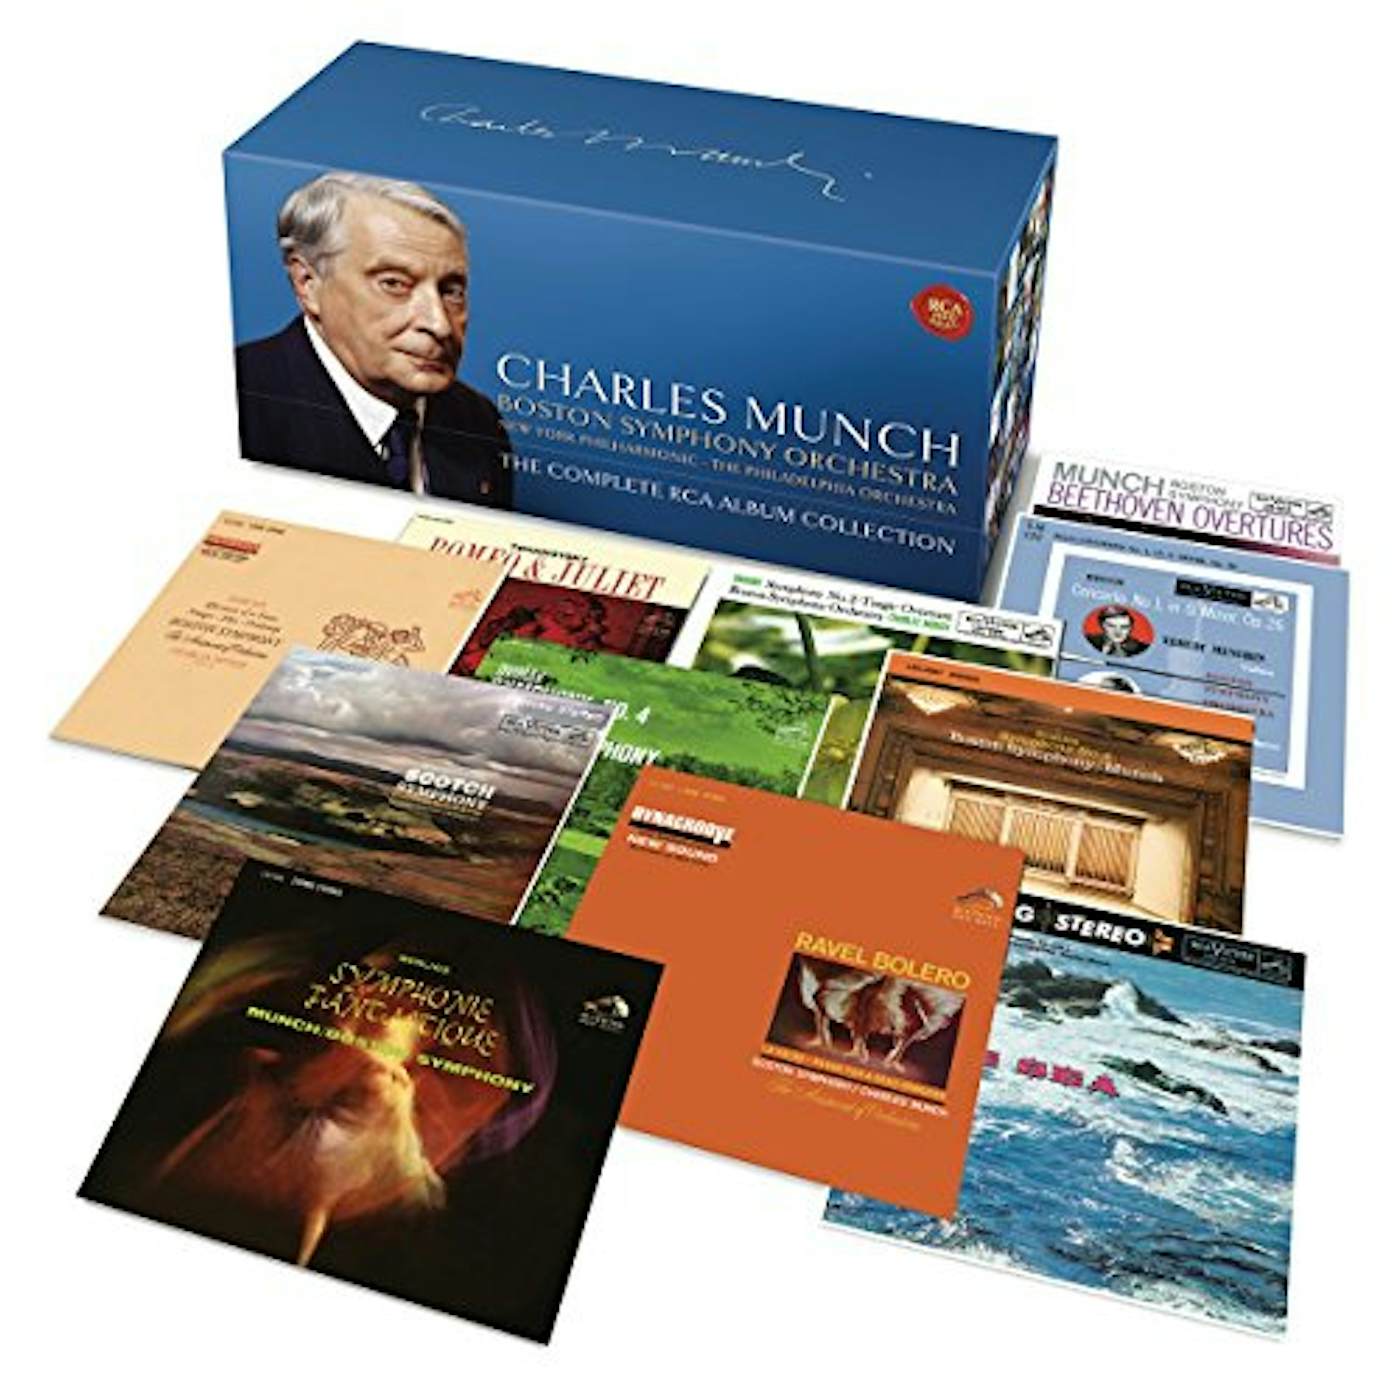 Charles Munch  COMPLETE ALBUM COLLECTION CD - UK Release